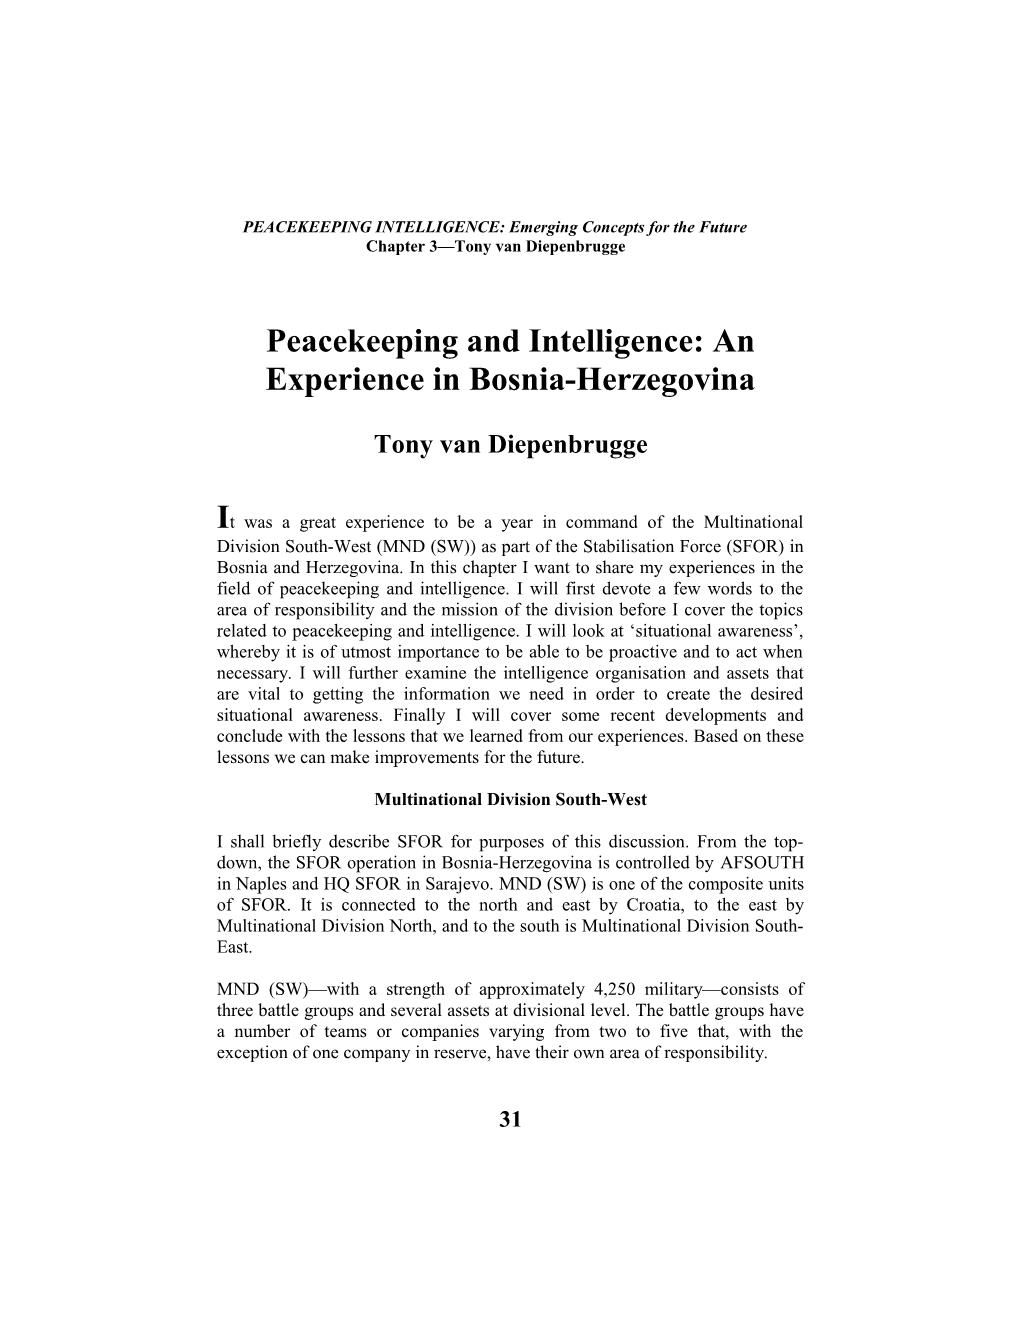 PEACEKEEPING INTELLIGENCE: Emerging Concepts for the Future s1